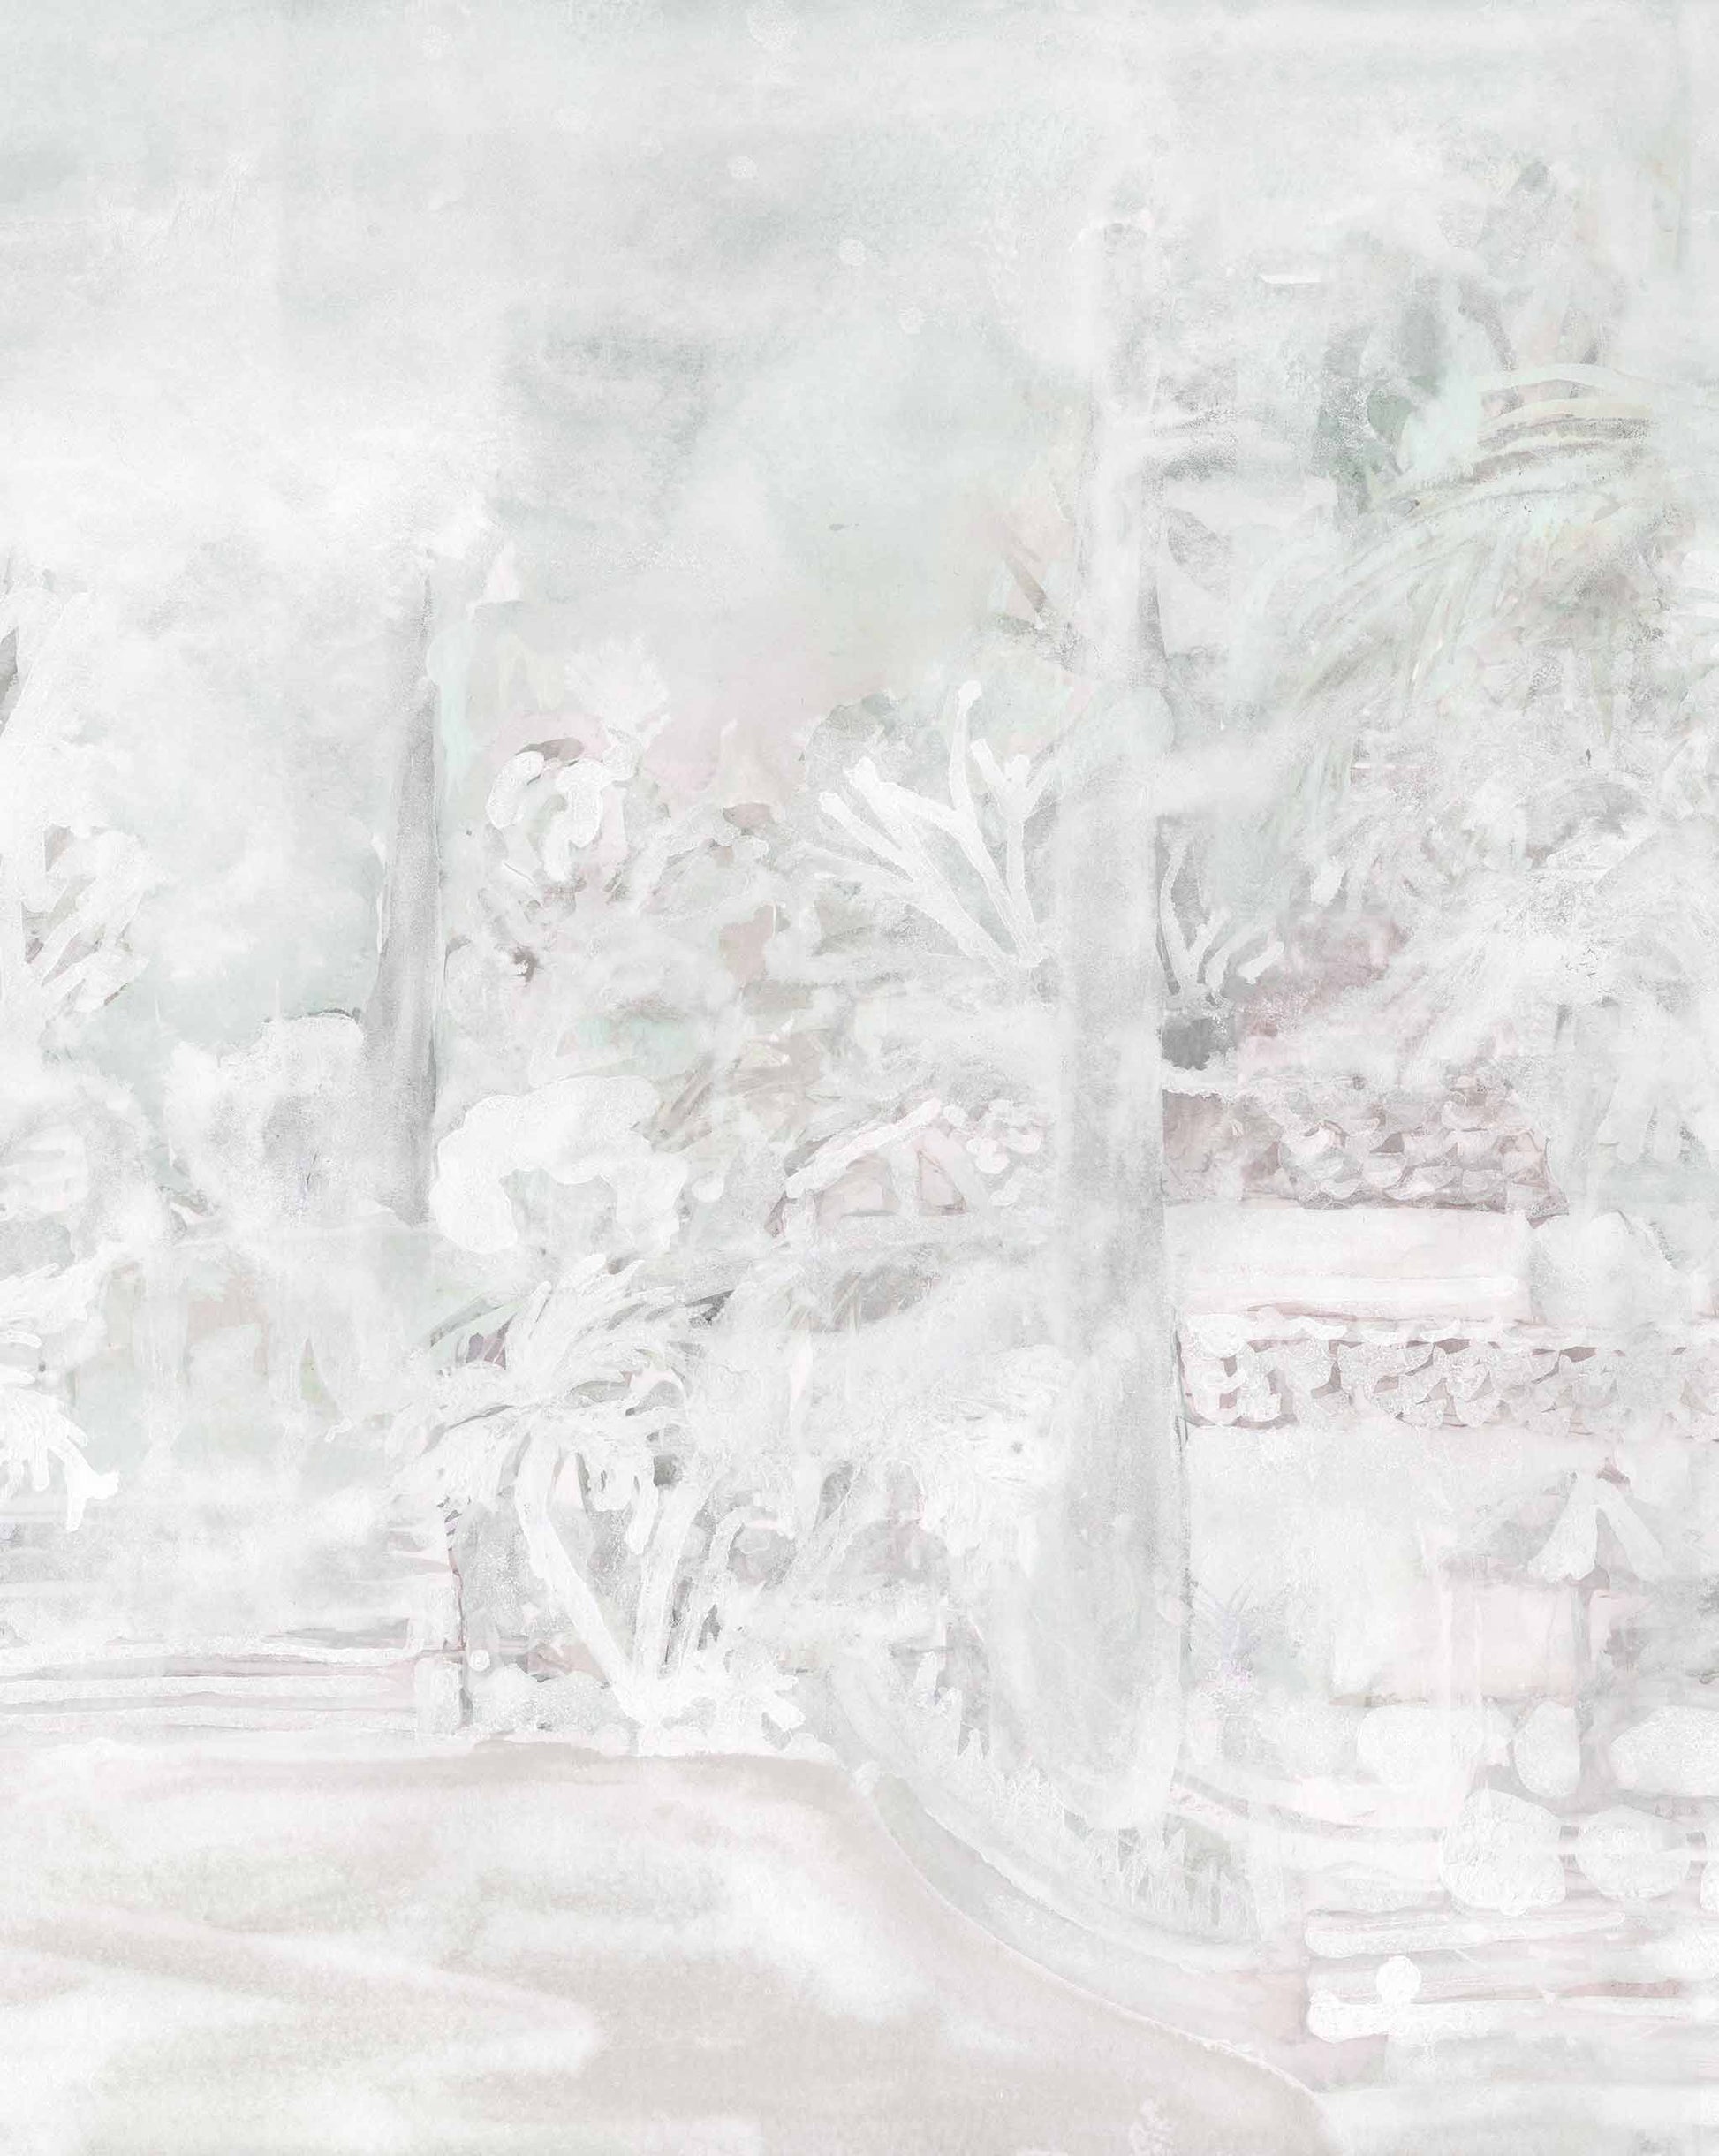 An impressionistic painting in shades of white depicting a serene, snow-covered landscape with subtle outlines of trees and foliage, evoking the Regalo di Dio Wallpaper Mural||Alba of an Italian villa.